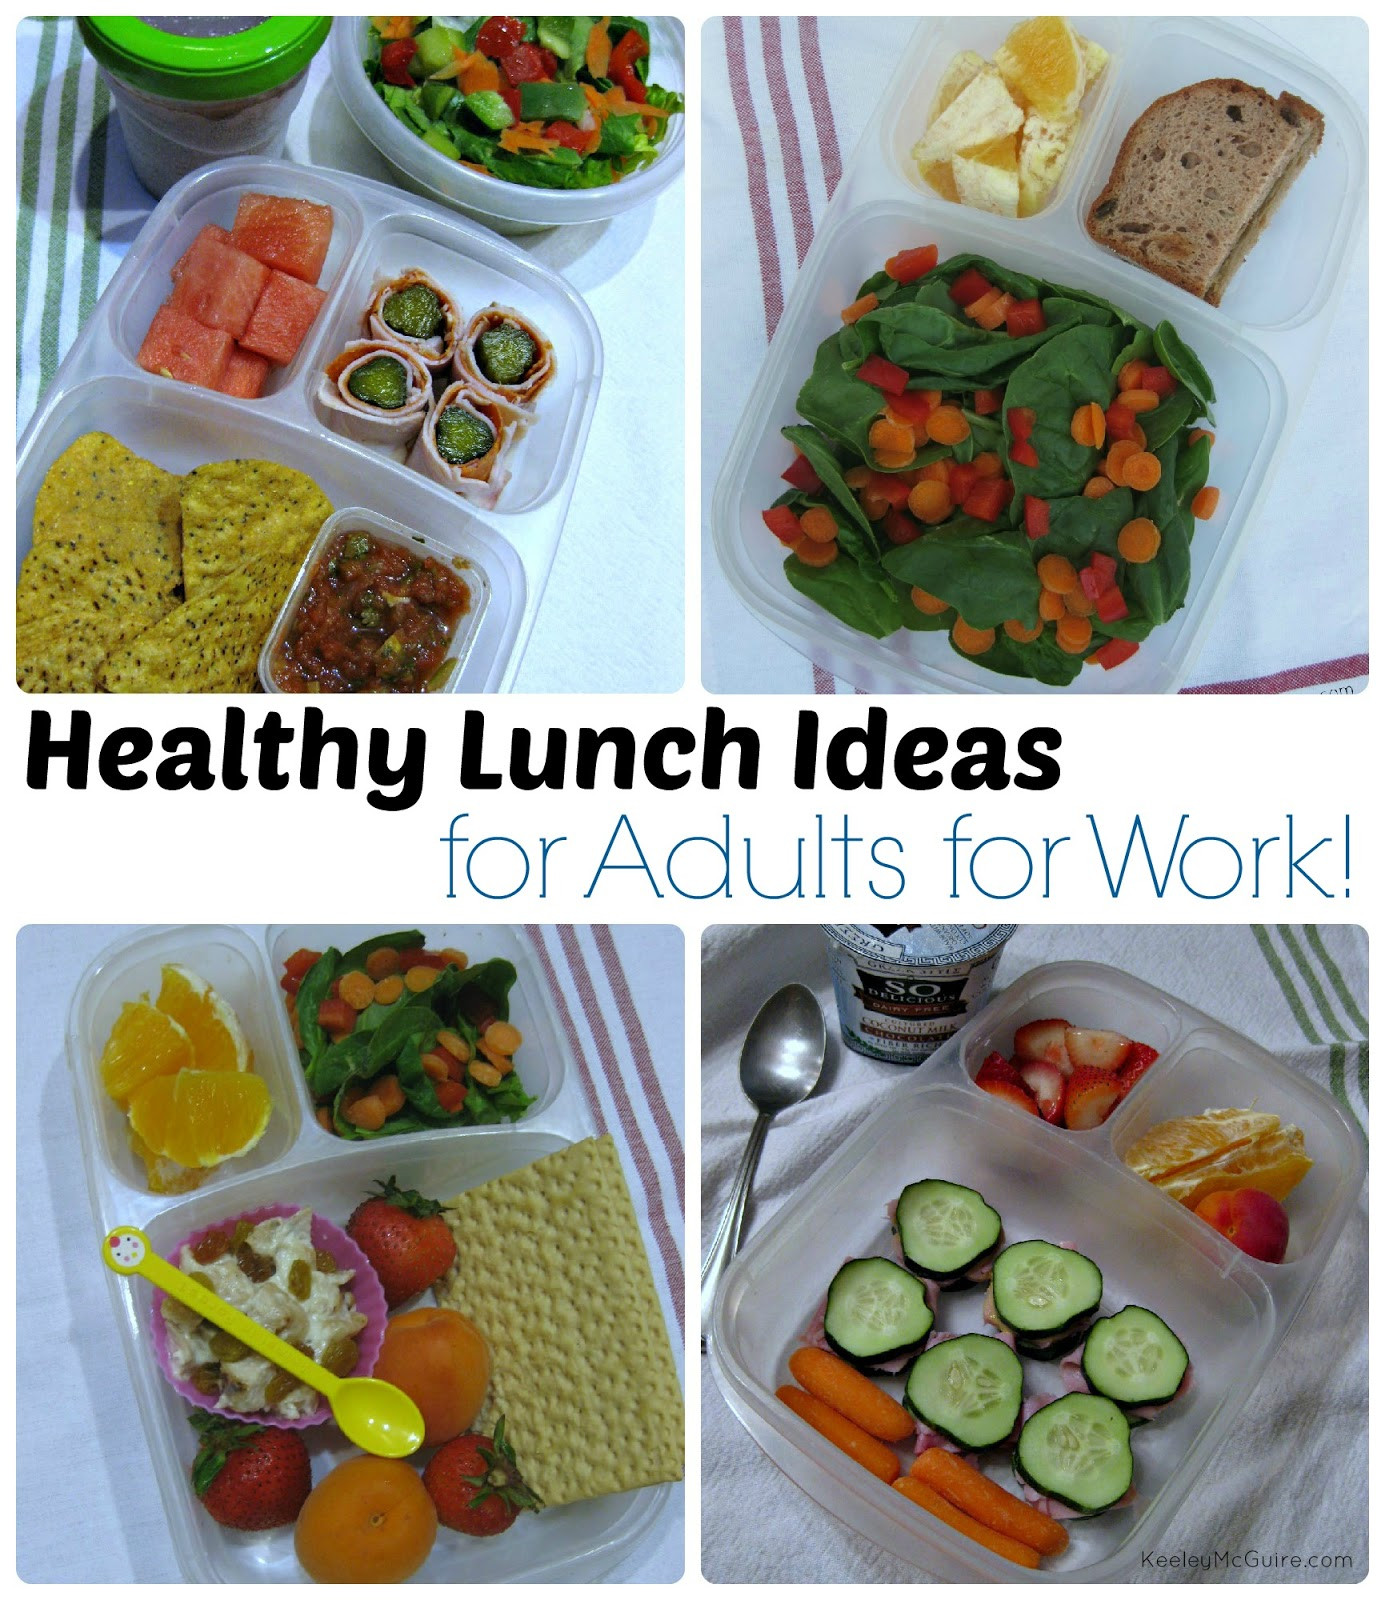 Simple Healthy Lunches for Work the 20 Best Ideas for Gluten Free &amp; Allergy Friendly Lunch Made Easy Healthy